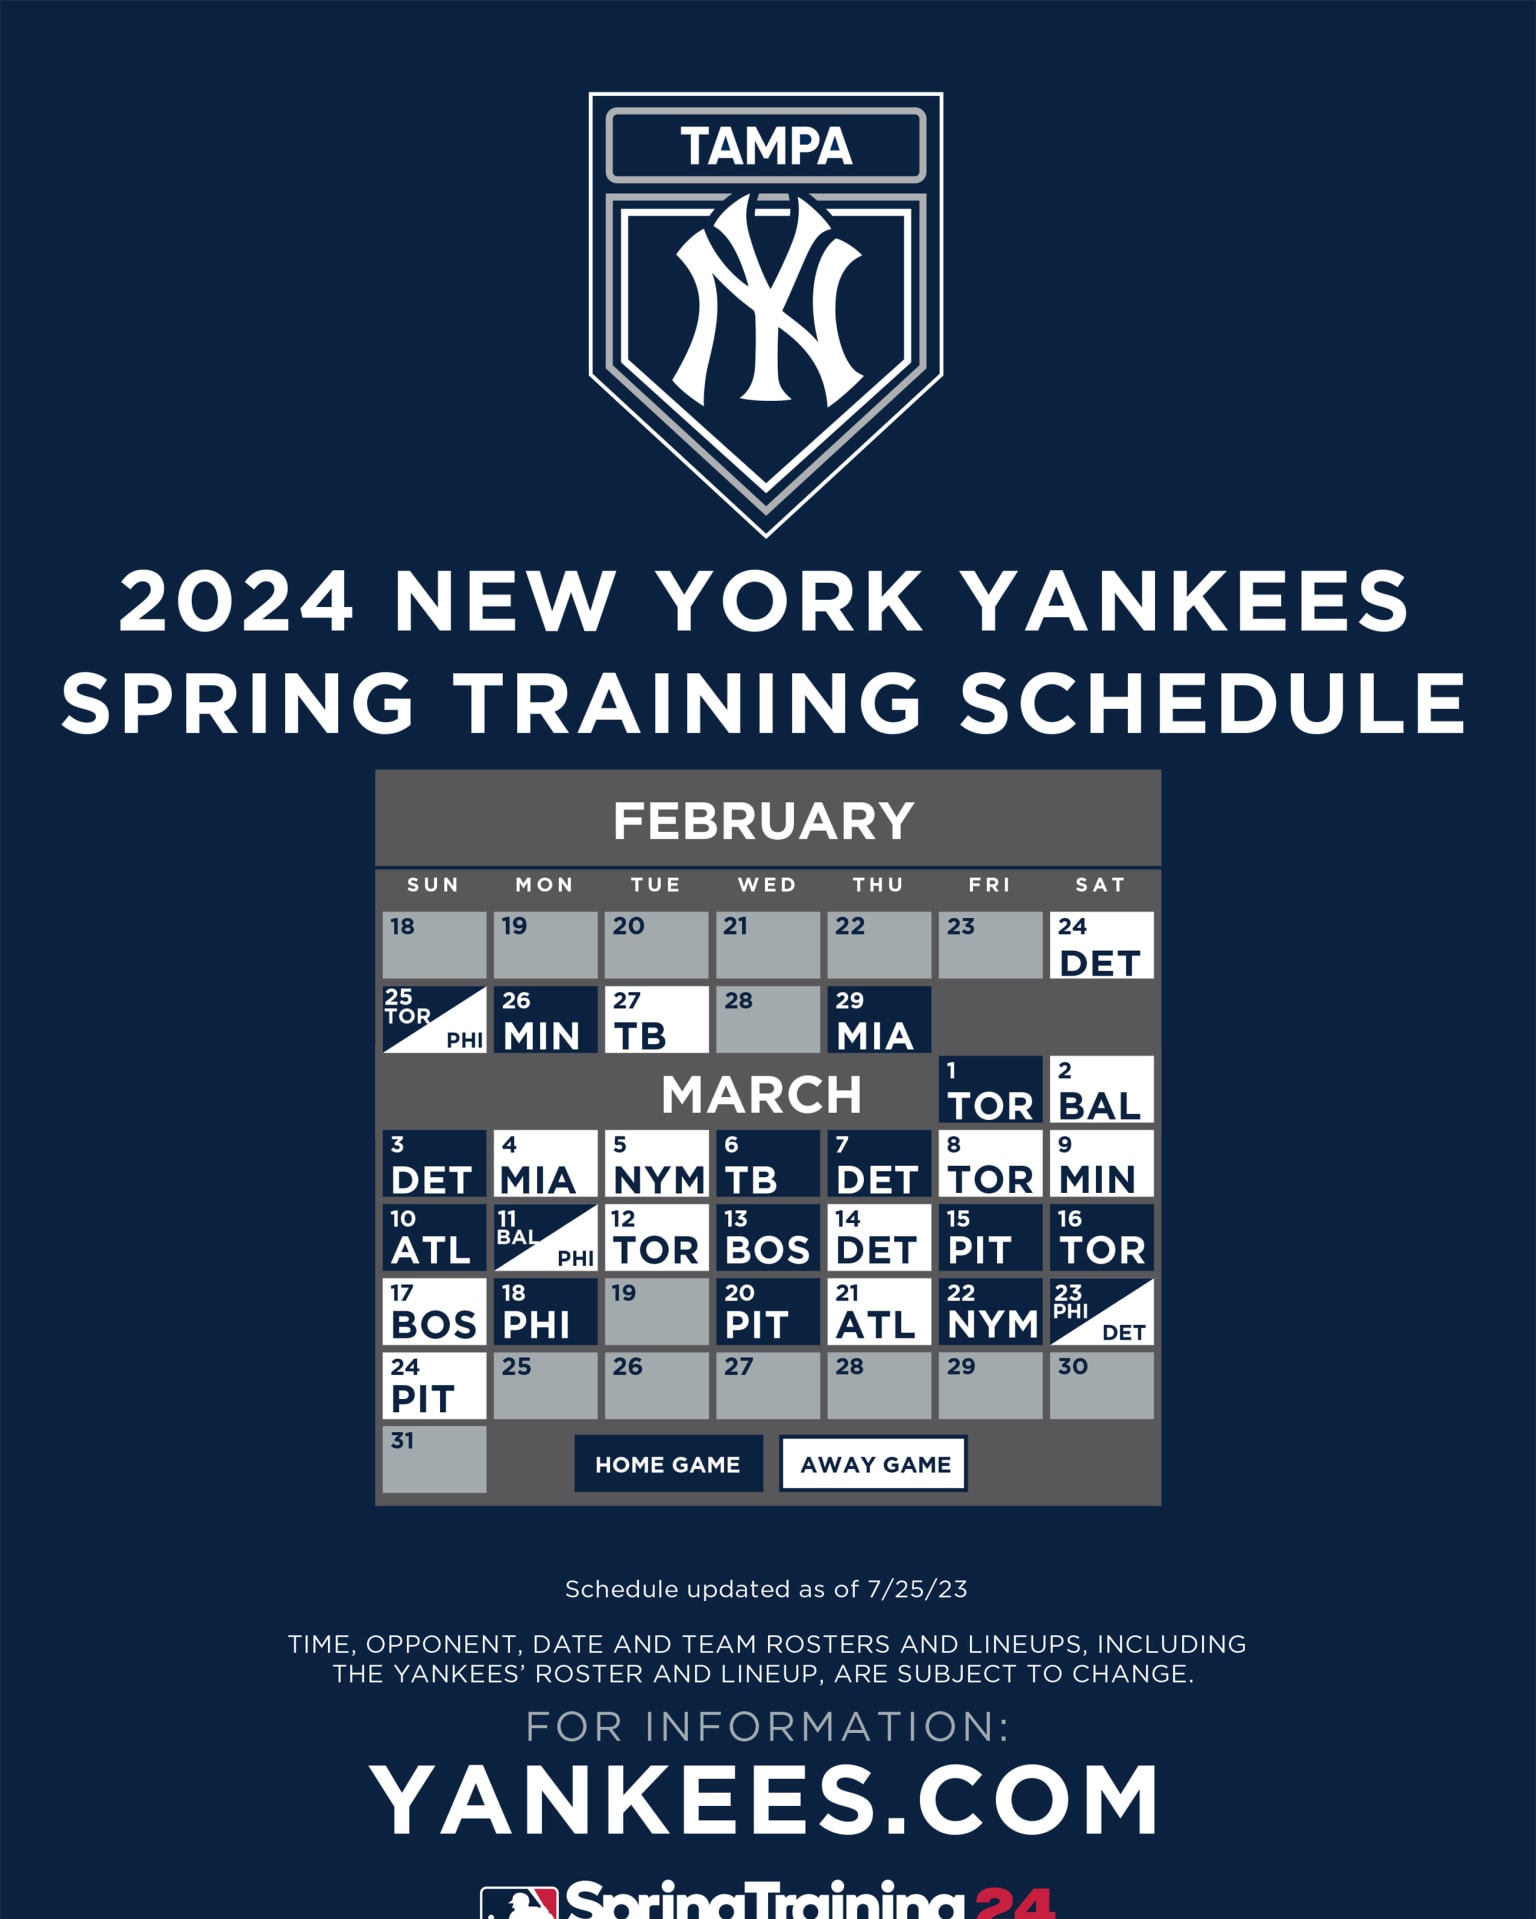 Yankees Release 2021 Schedule - Pinstriped Prospects